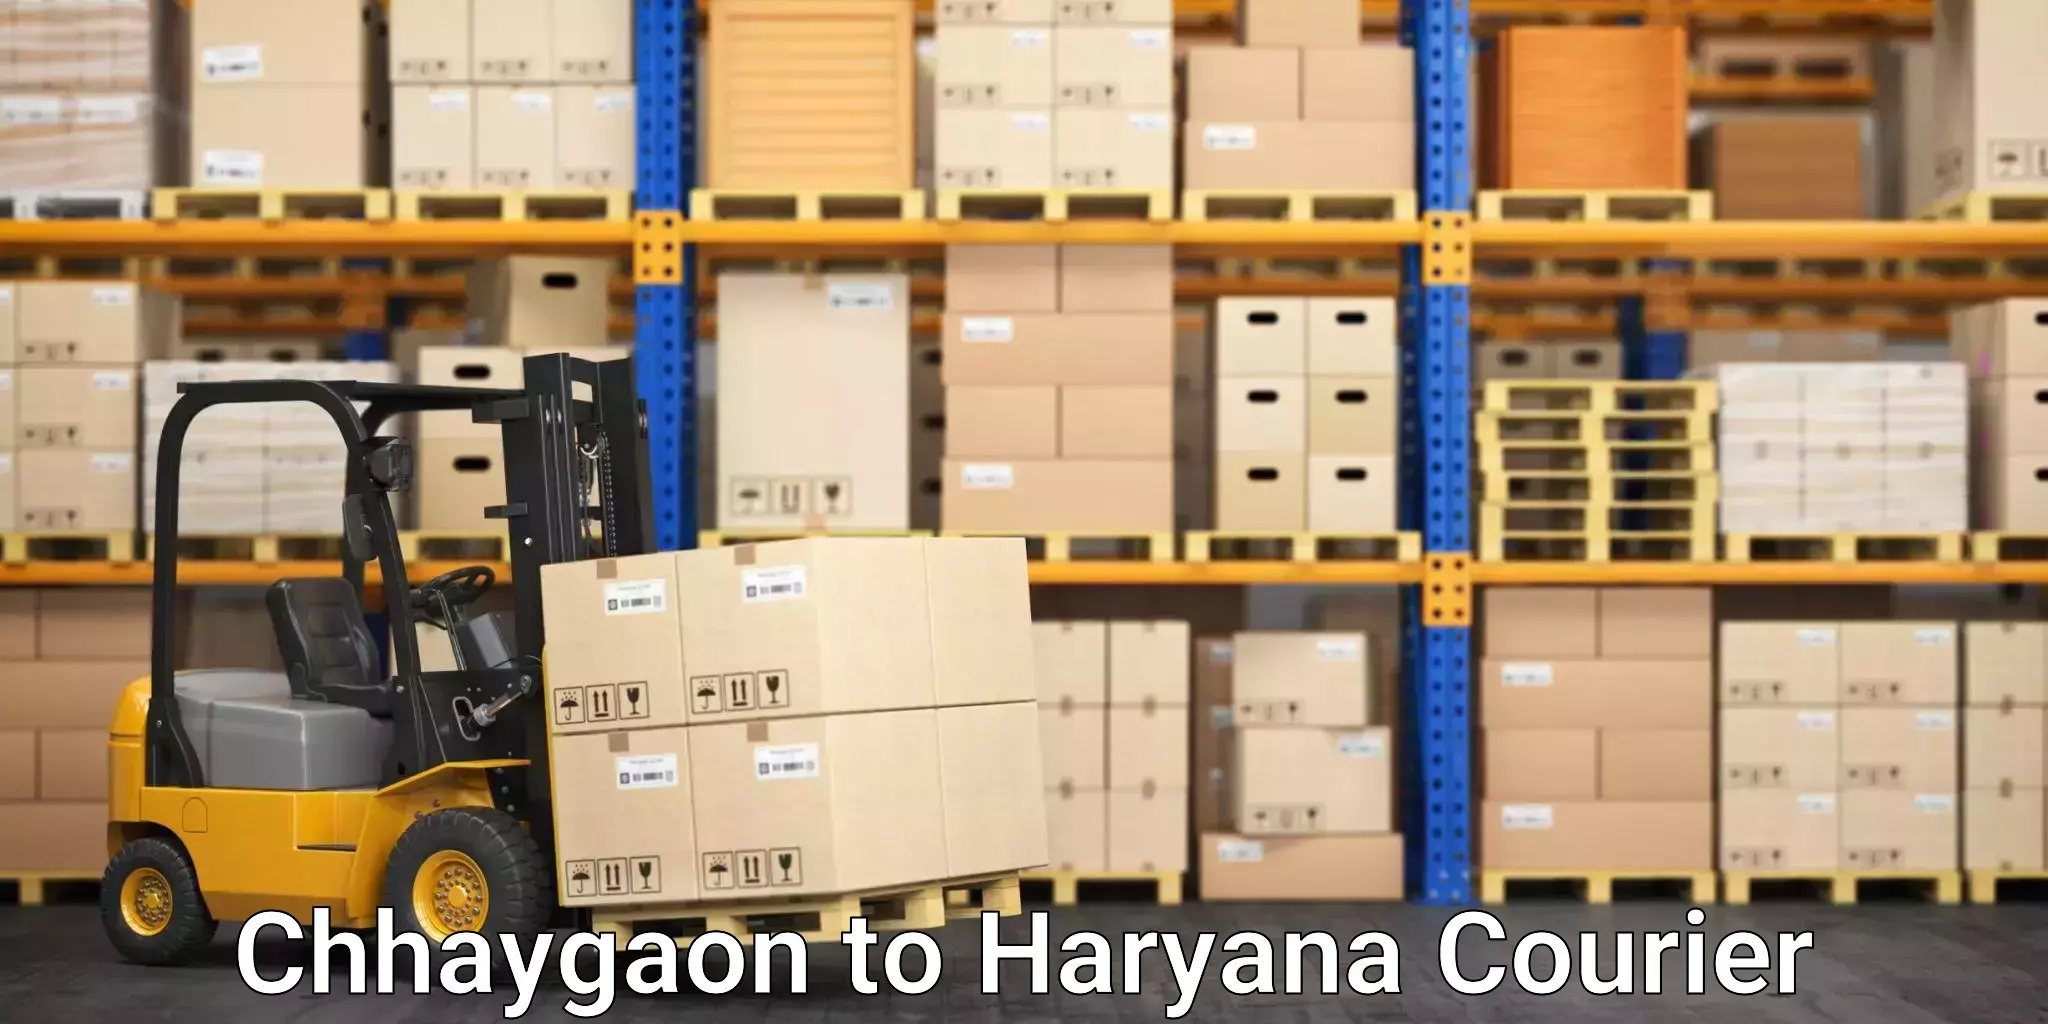 User-friendly courier app Chhaygaon to Panipat